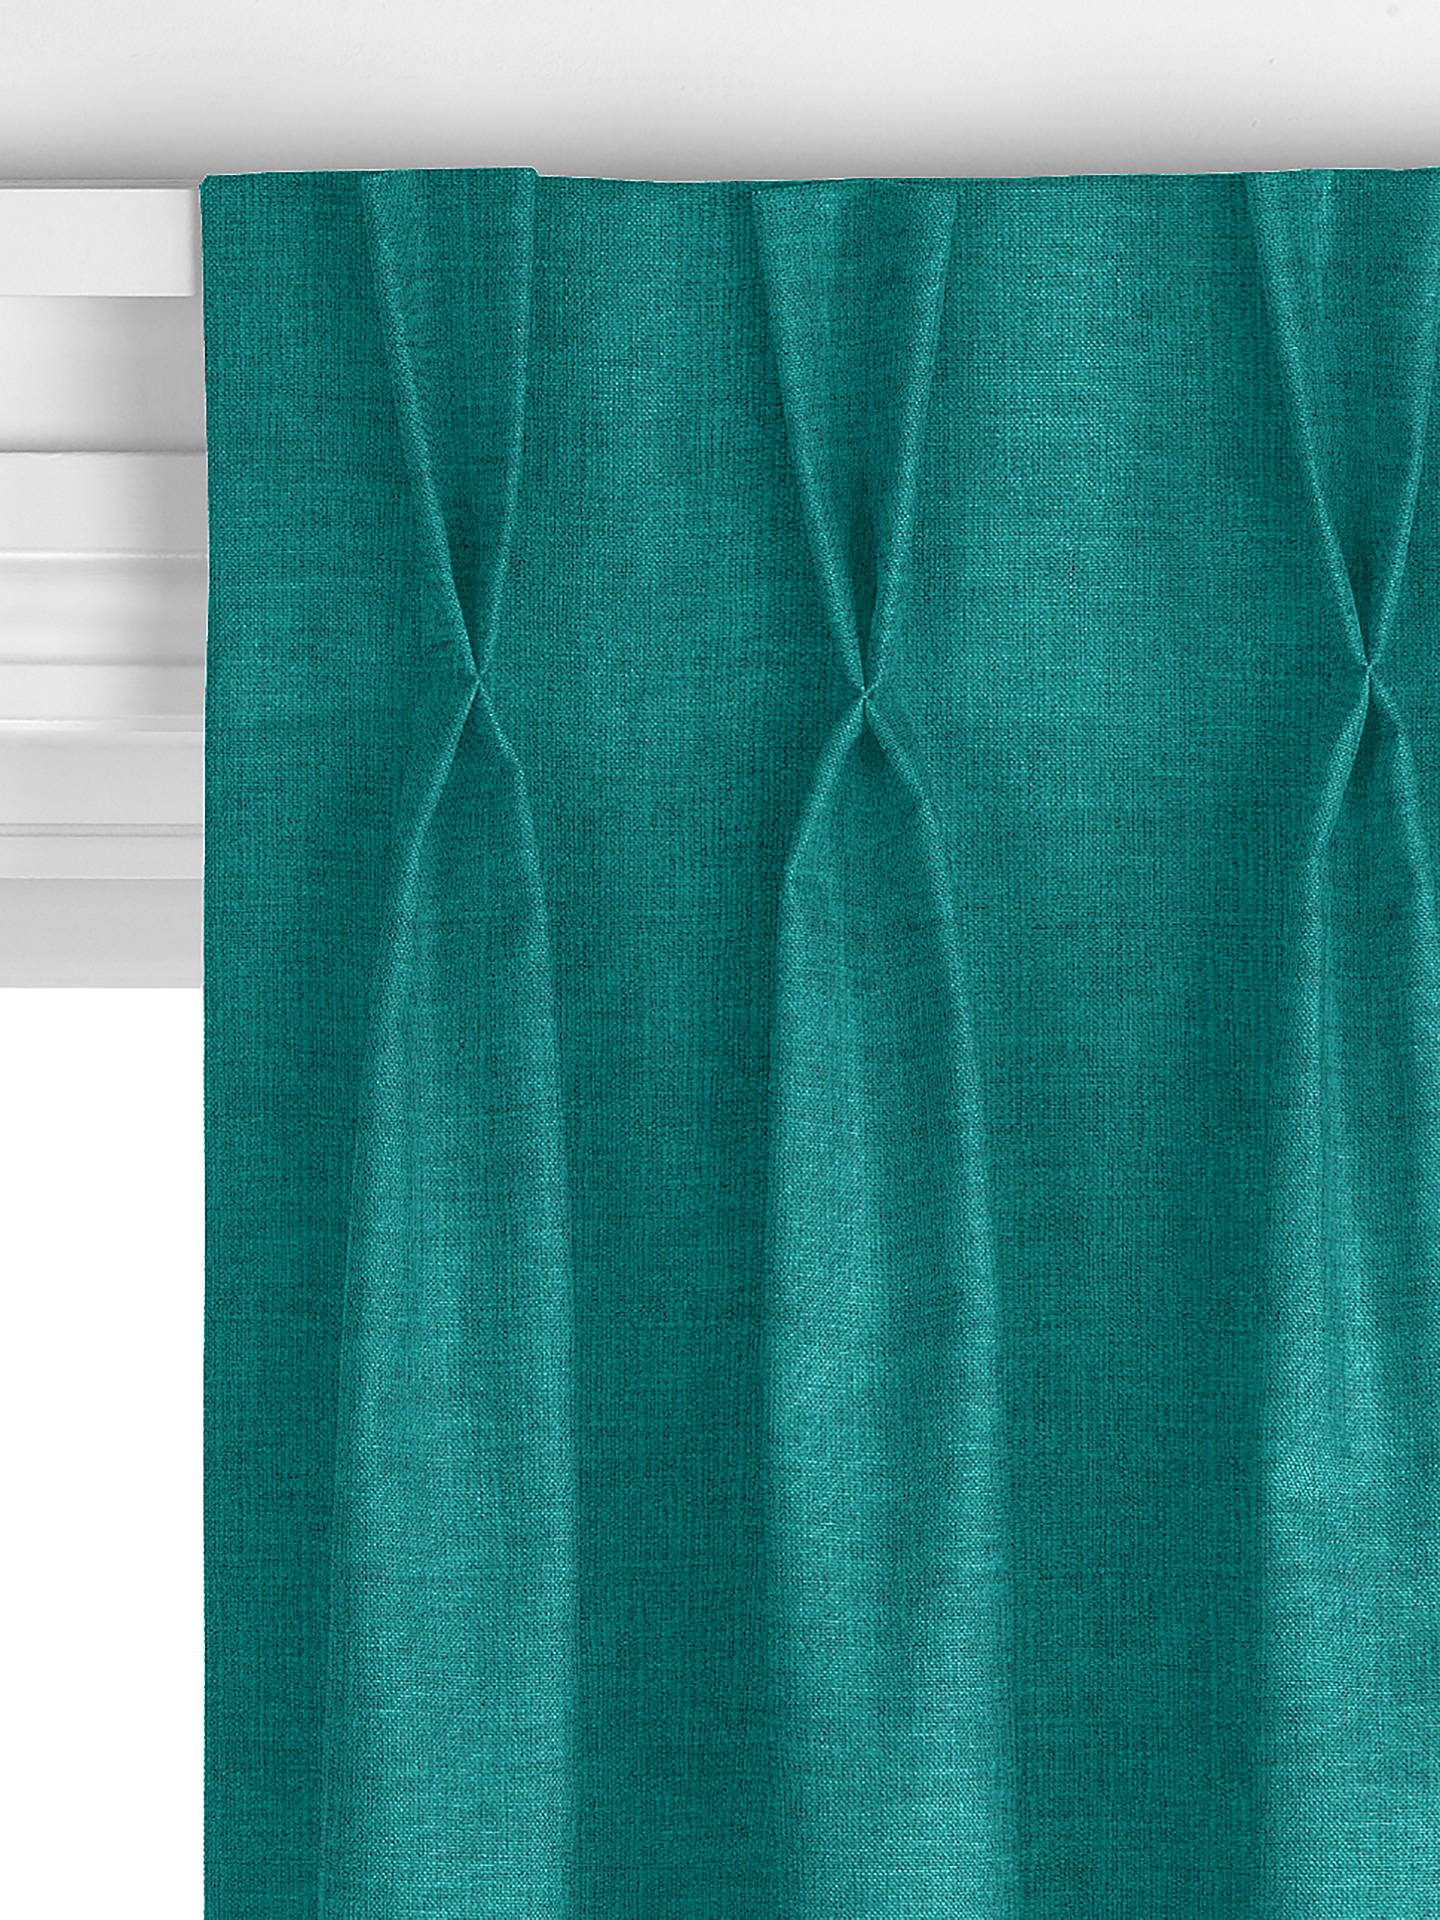 John Lewis Cotton Blend Made to Measure Curtains, Dark Peacock